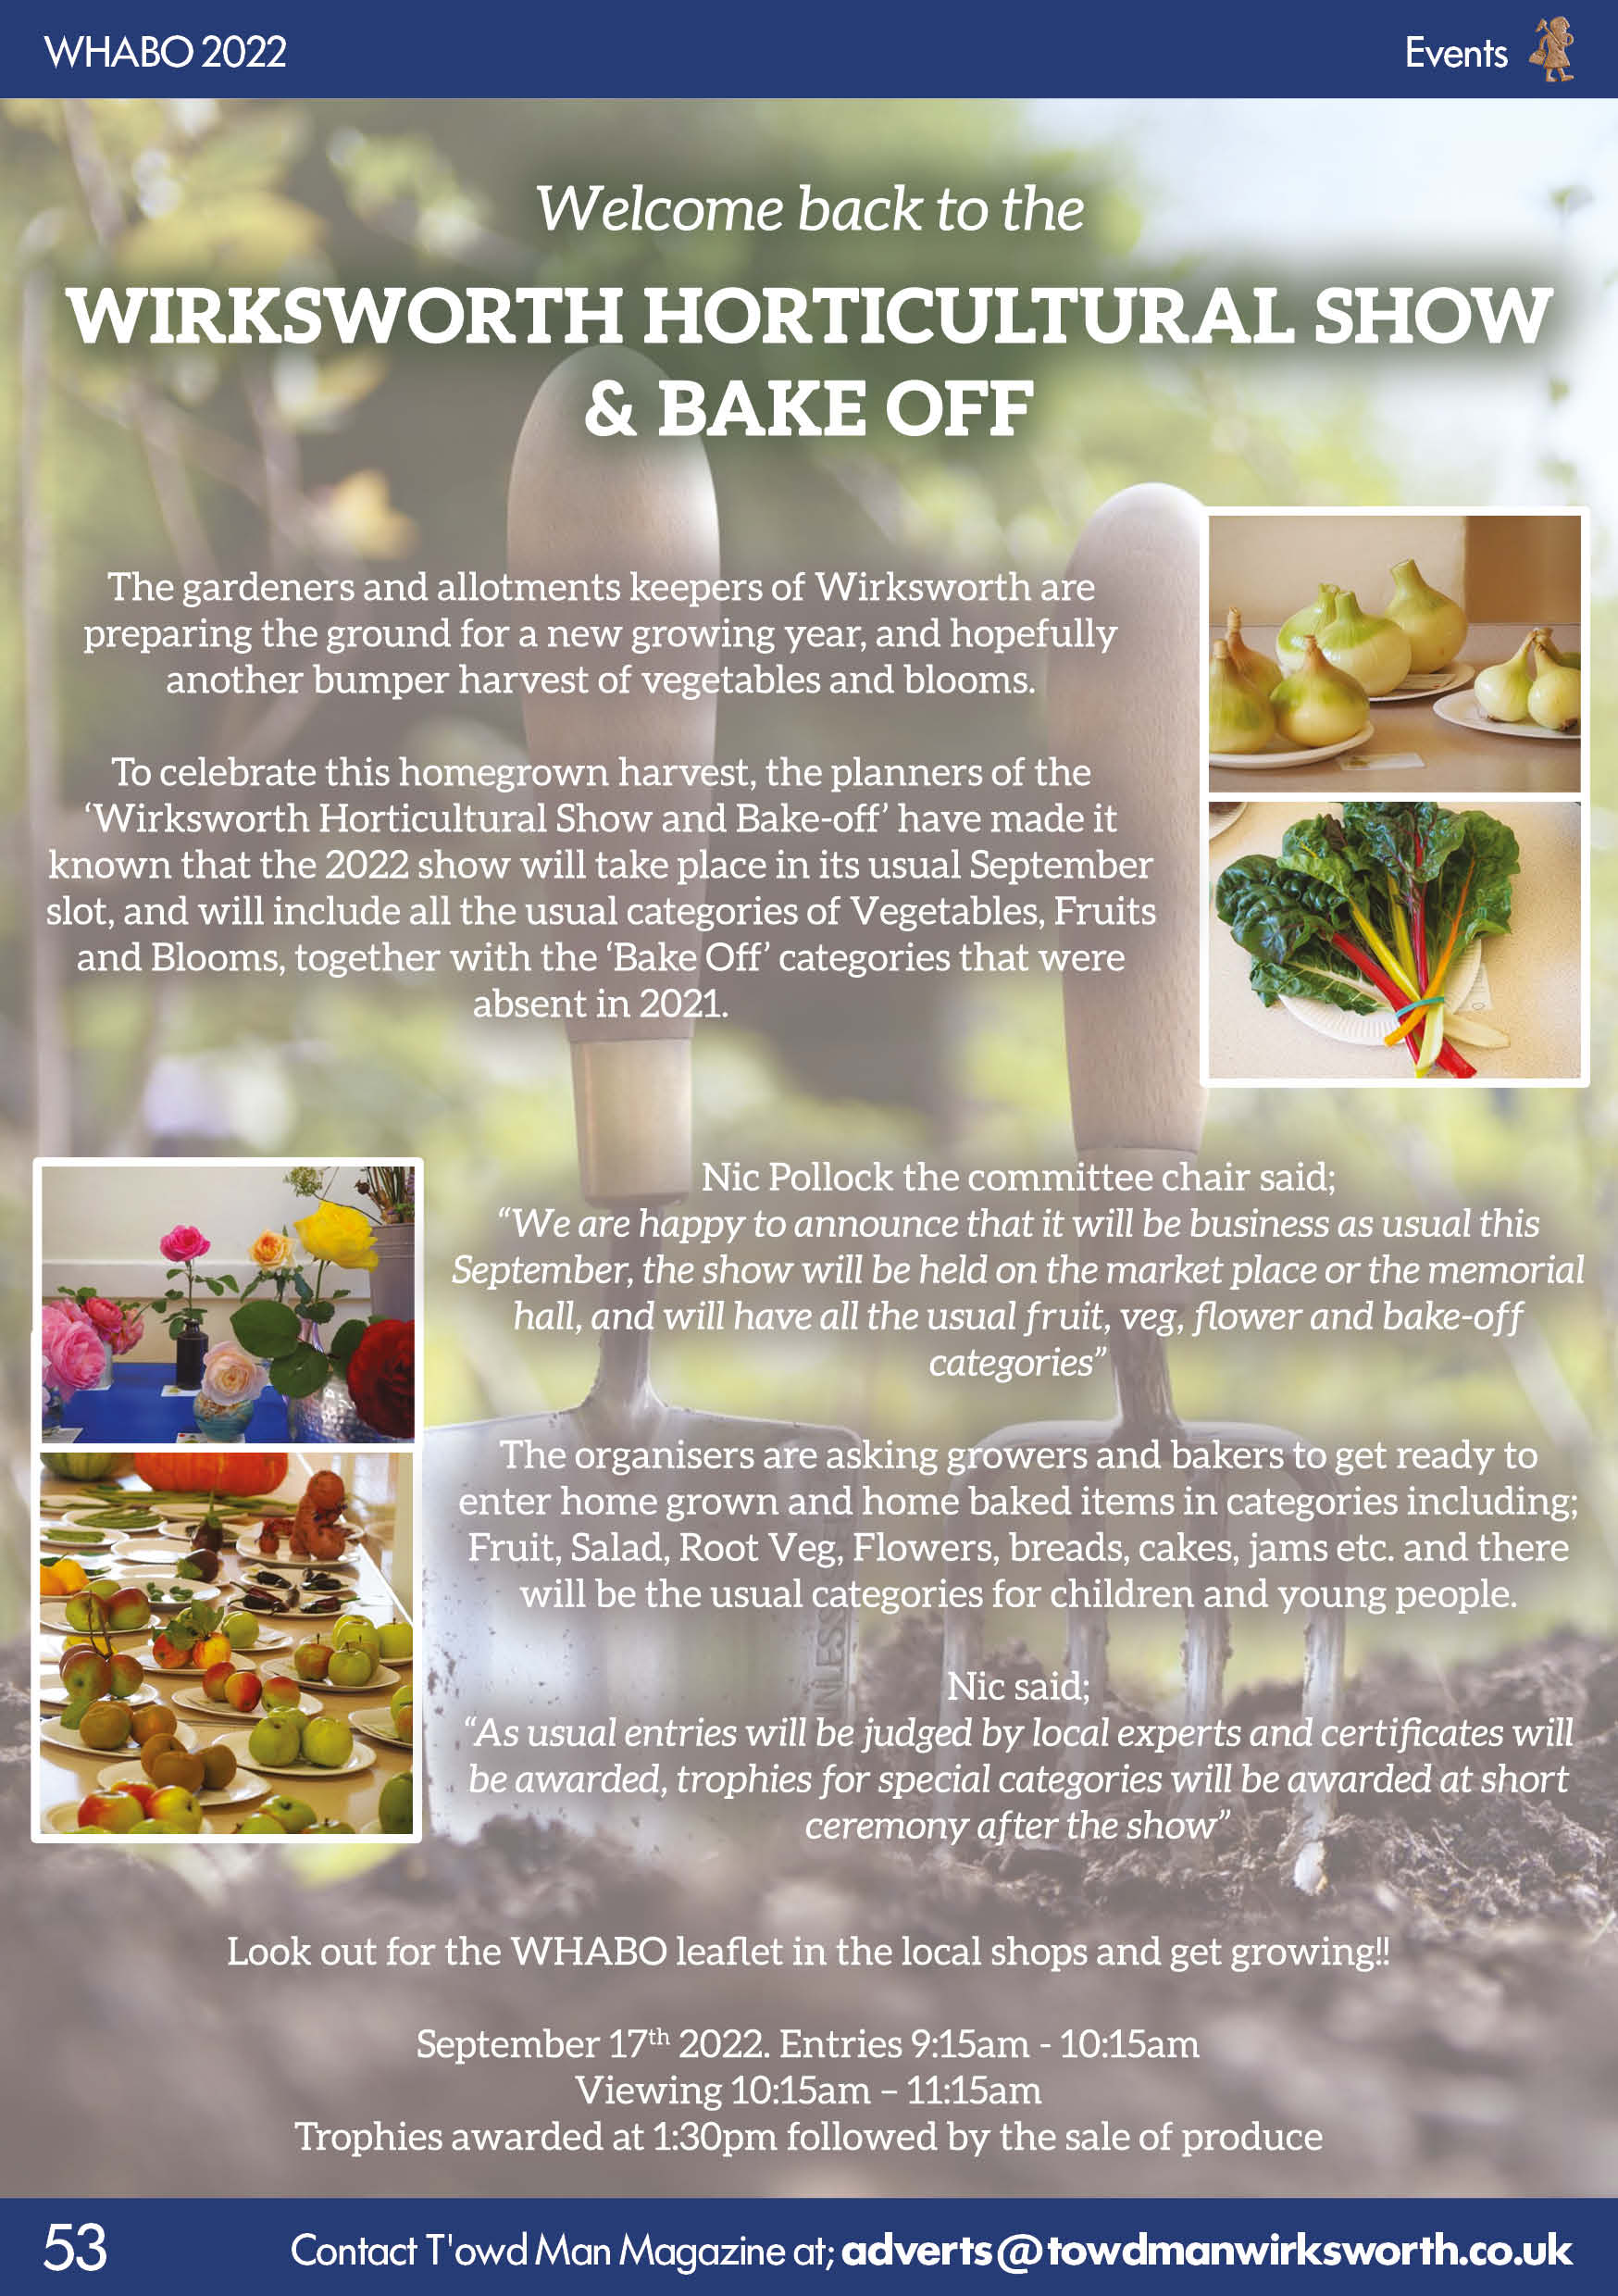 Wirksworth Horticultural and Bake-Off Show